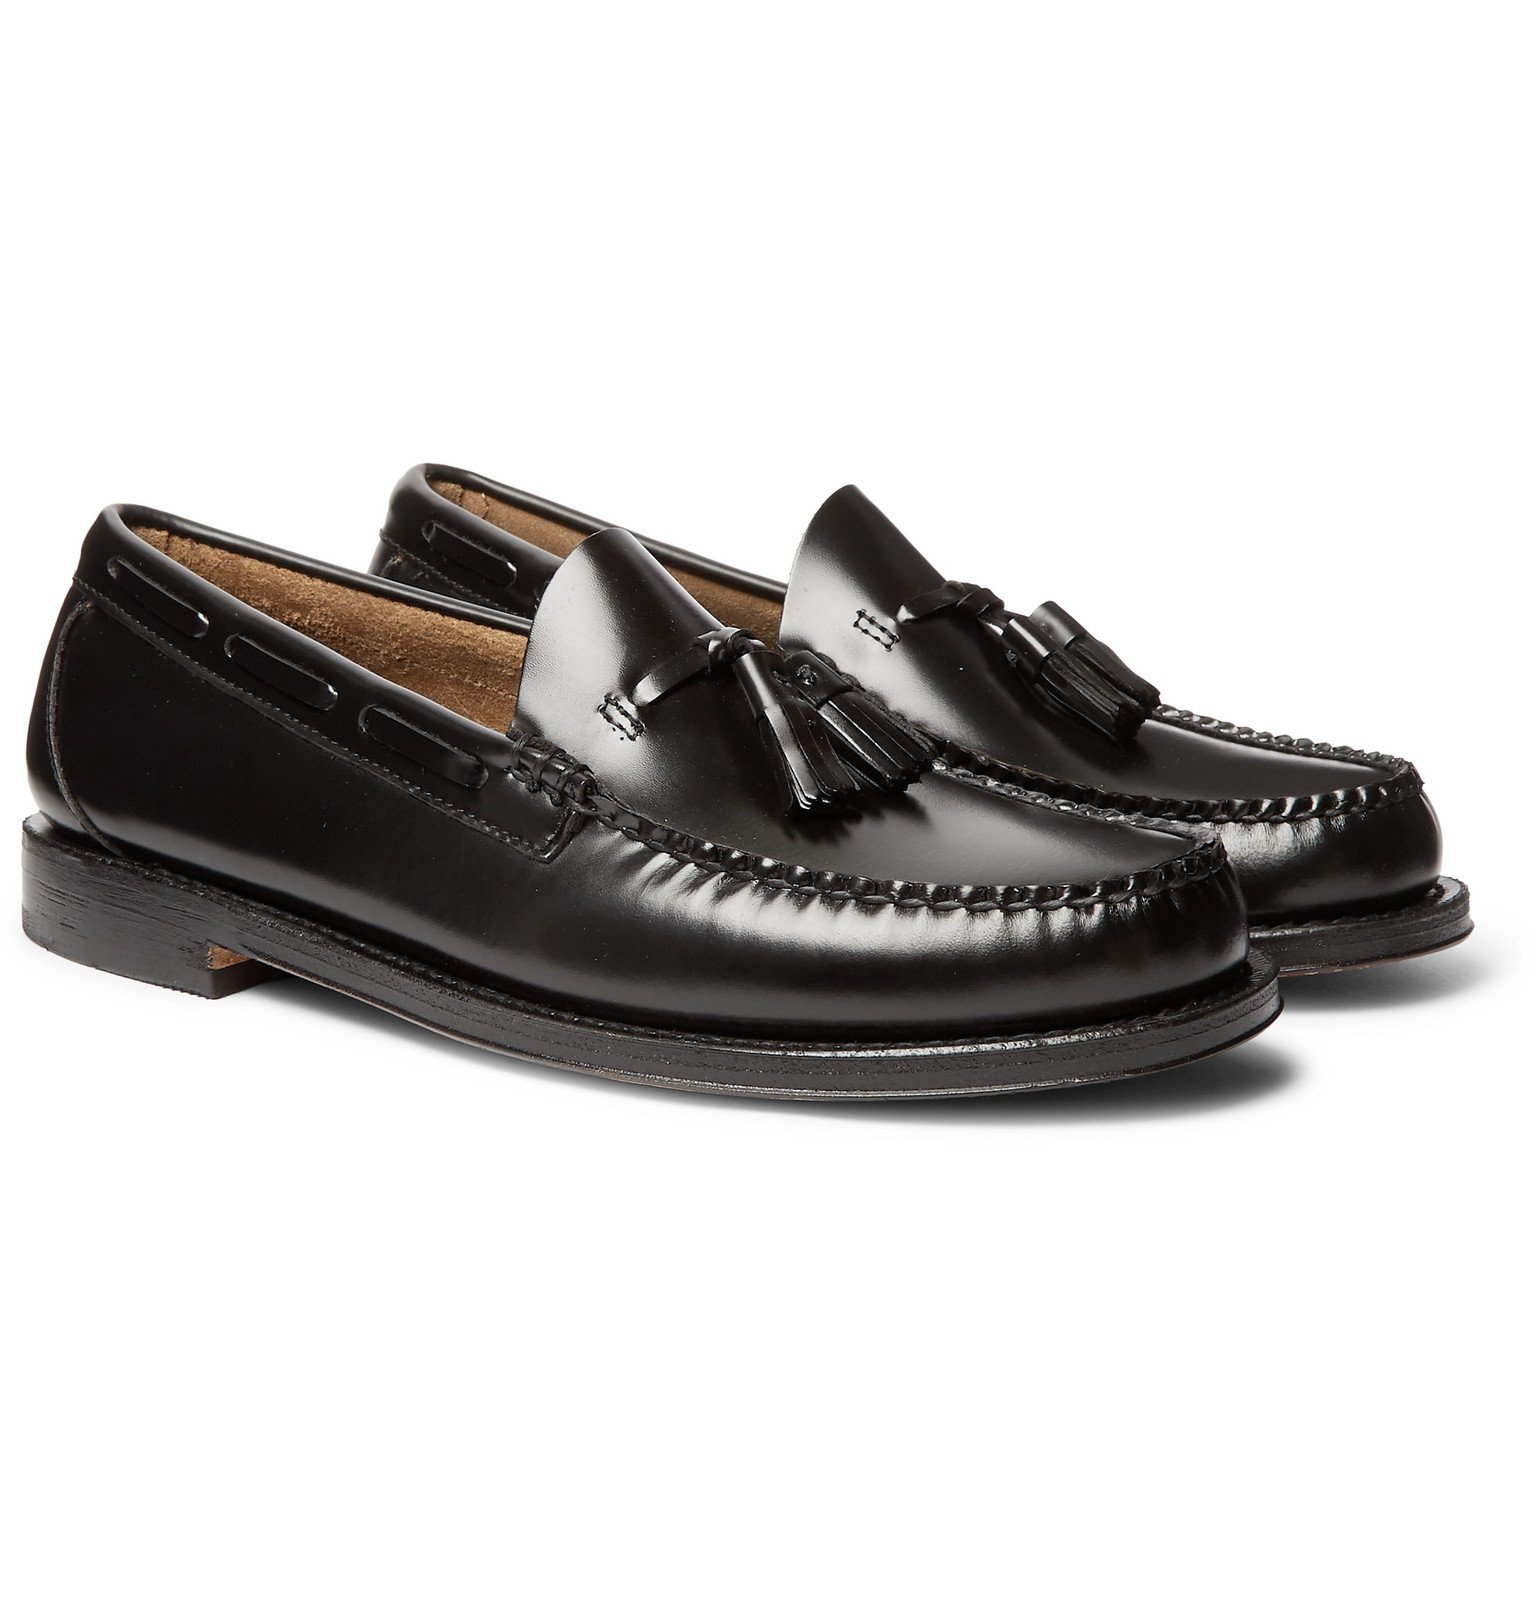 G.H. Bass & Co. - Weejuns Larkin Leather Tasselled Loafers - Black G.H ...